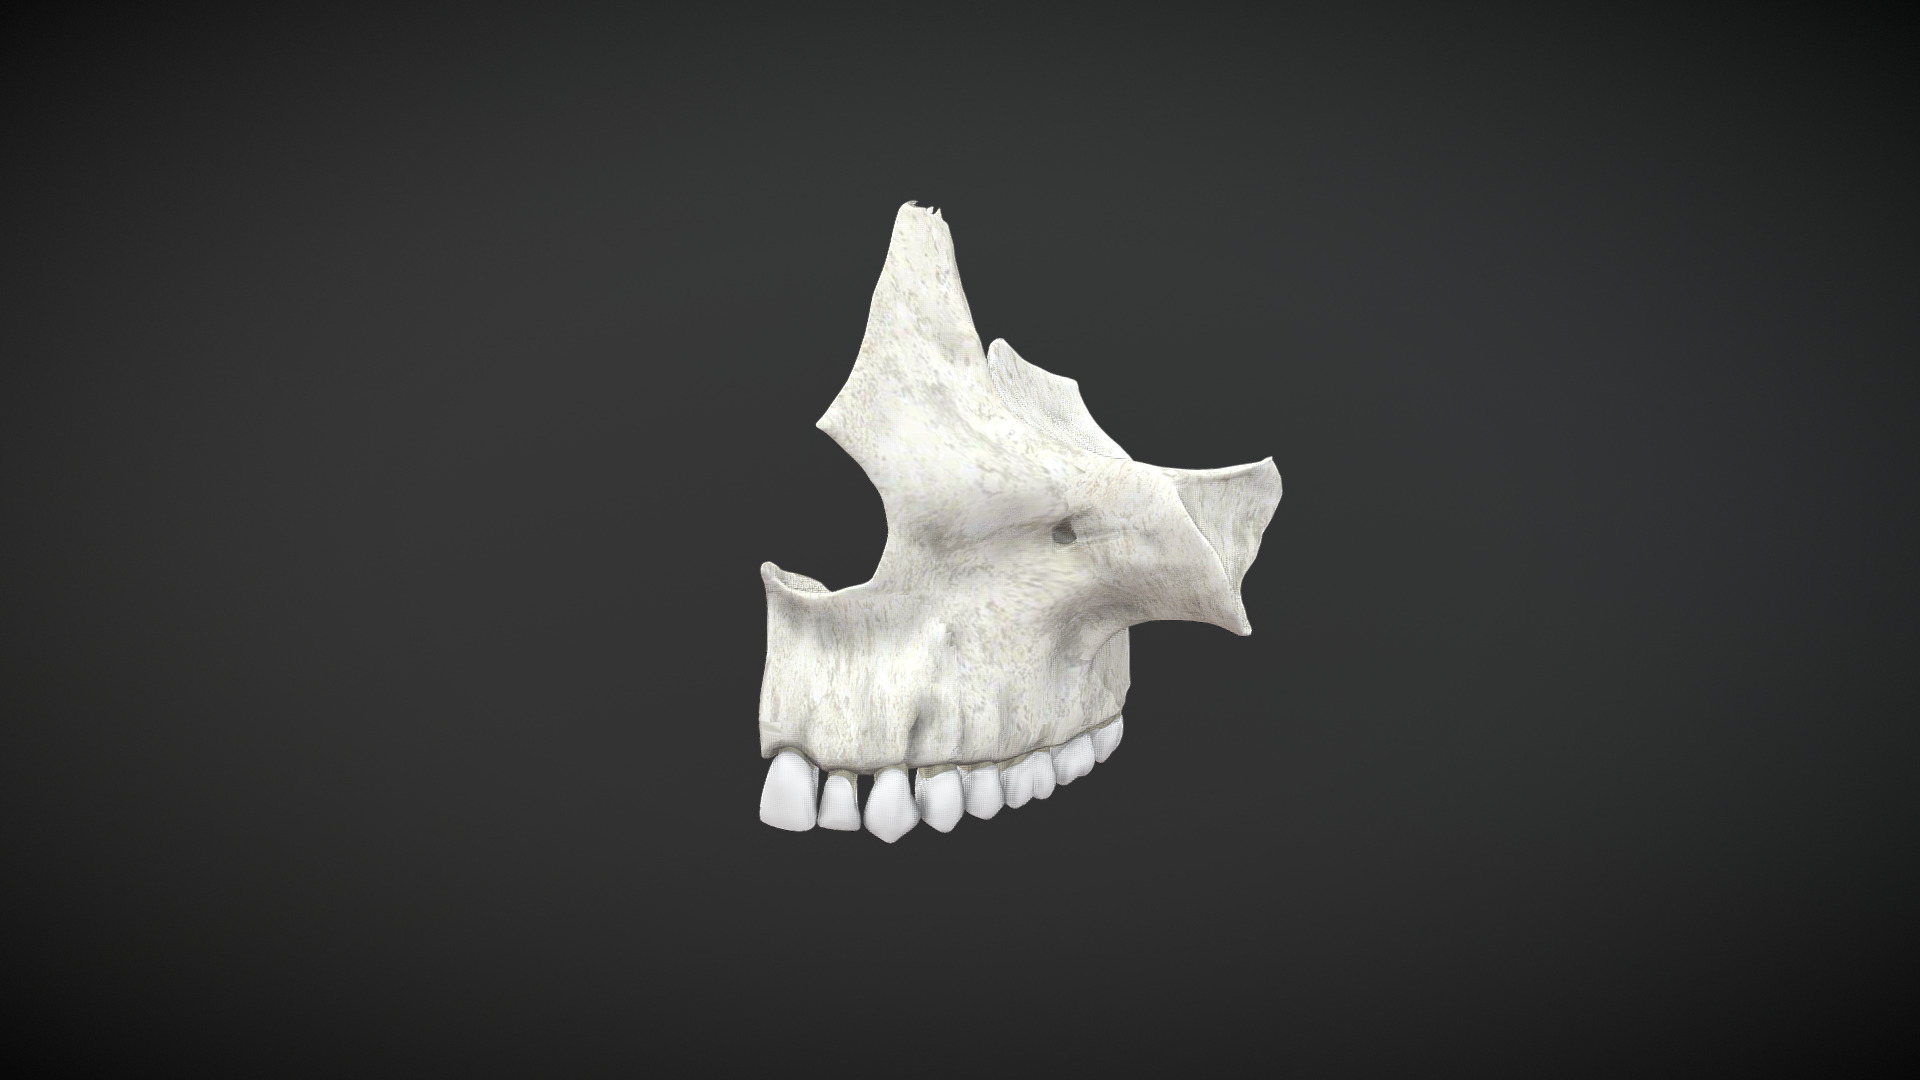 3D model maxillary simple / Maxilar Simple - This is a 3D model of the maxillary simple / Maxilar Simple. The 3D model is about a white paper with a black background.